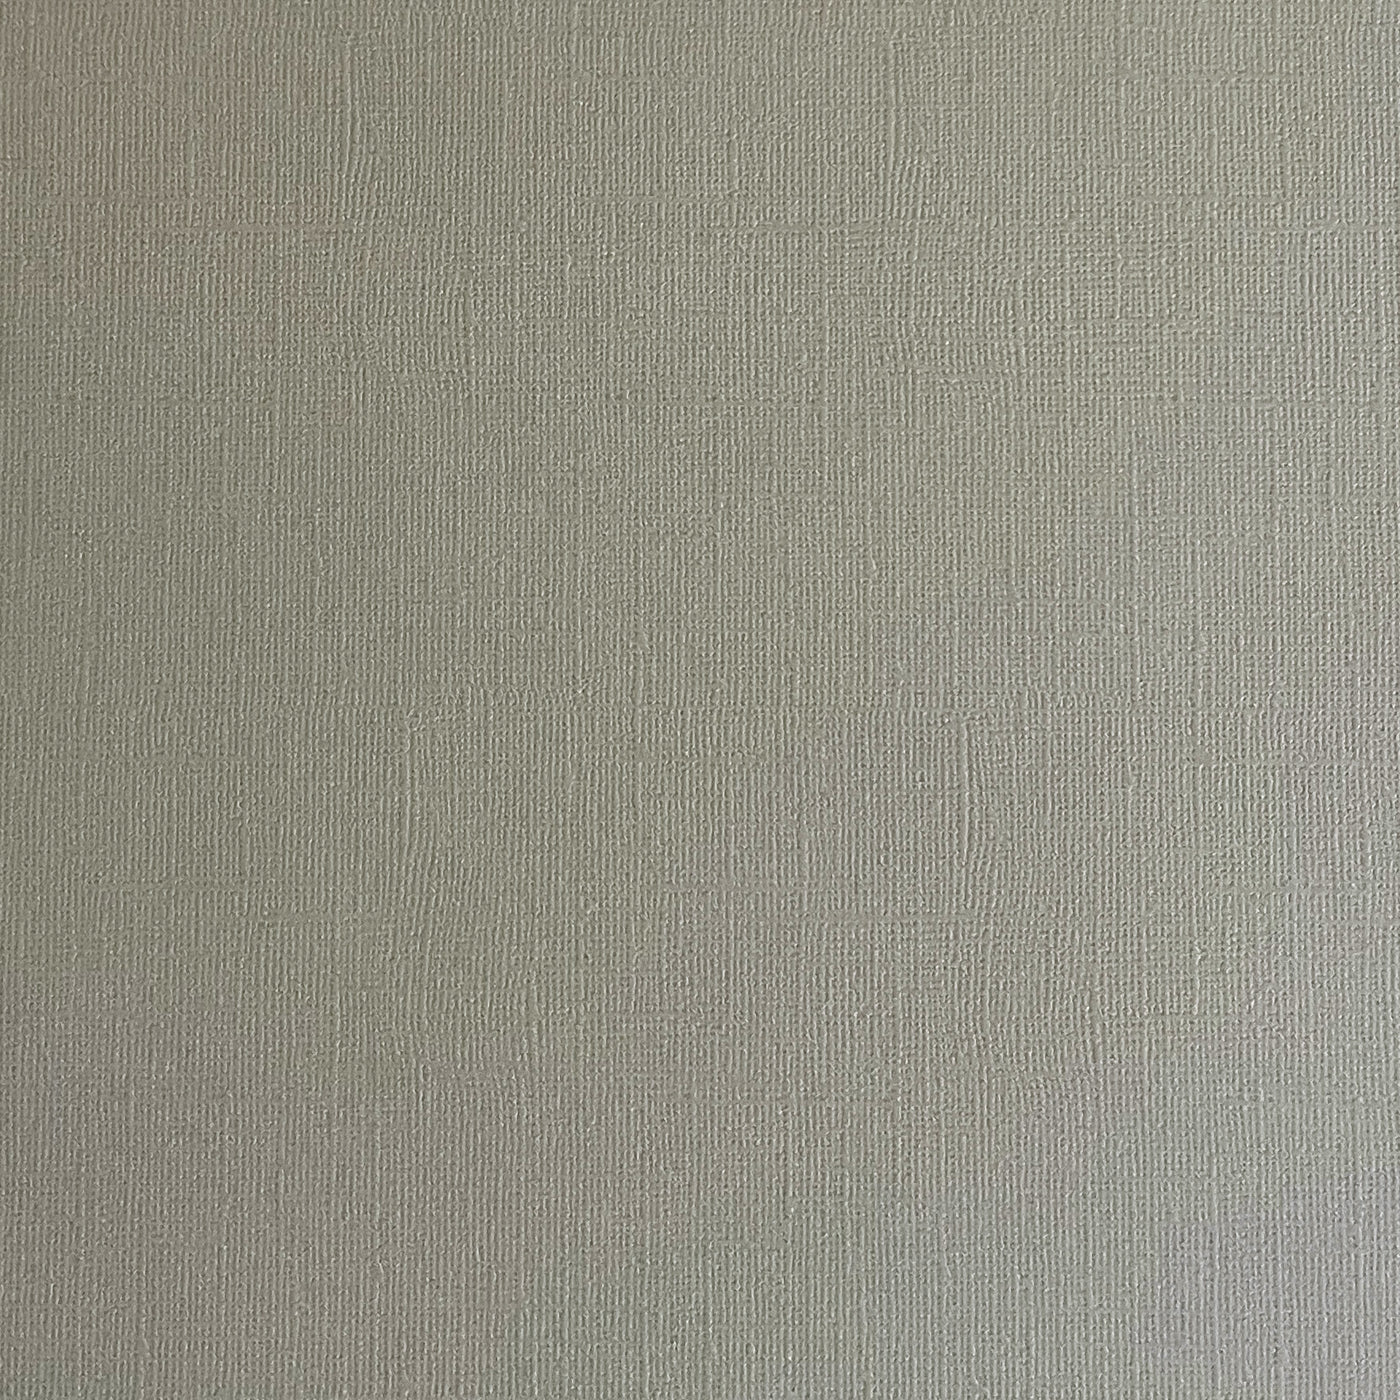 PUTTY GRAY - Textured 12x12 Cardstock - Encore Paper- Light Gray Textured Cardstock